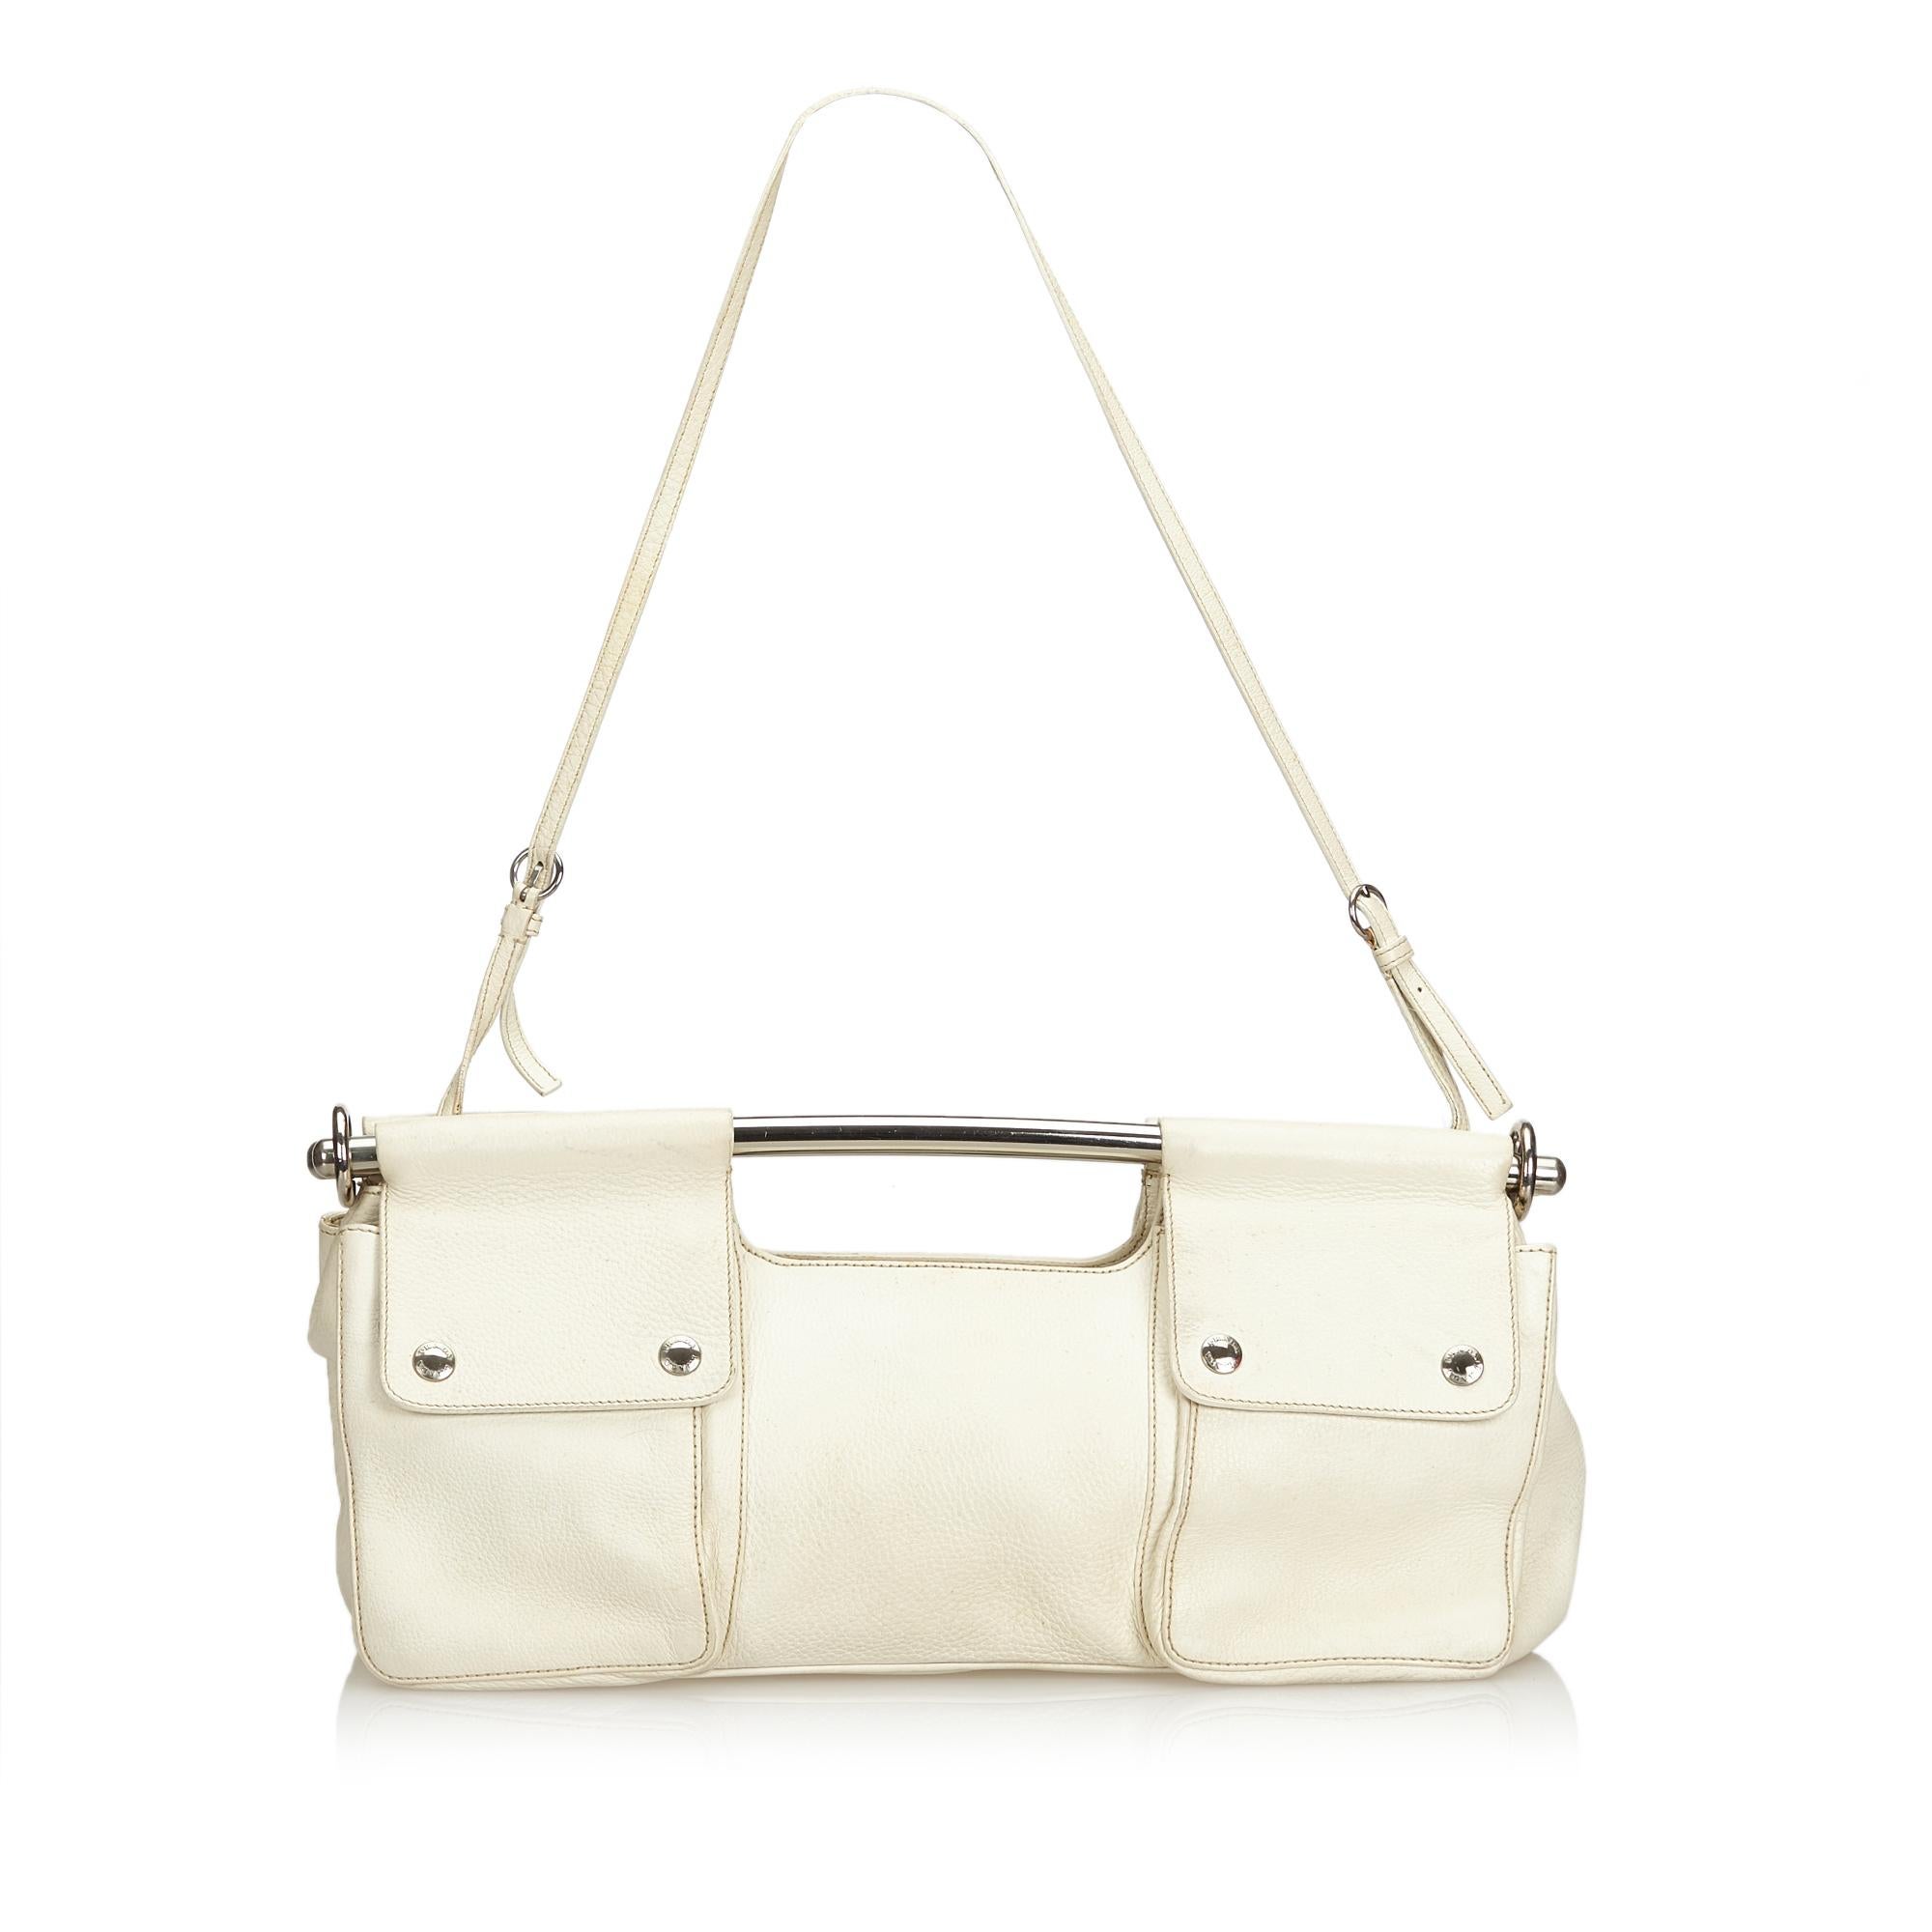 Vintage Authentic Prada White Leather Bar Shoulder Bag Italy w Dust Bag LARGE  In Good Condition For Sale In Orlando, FL